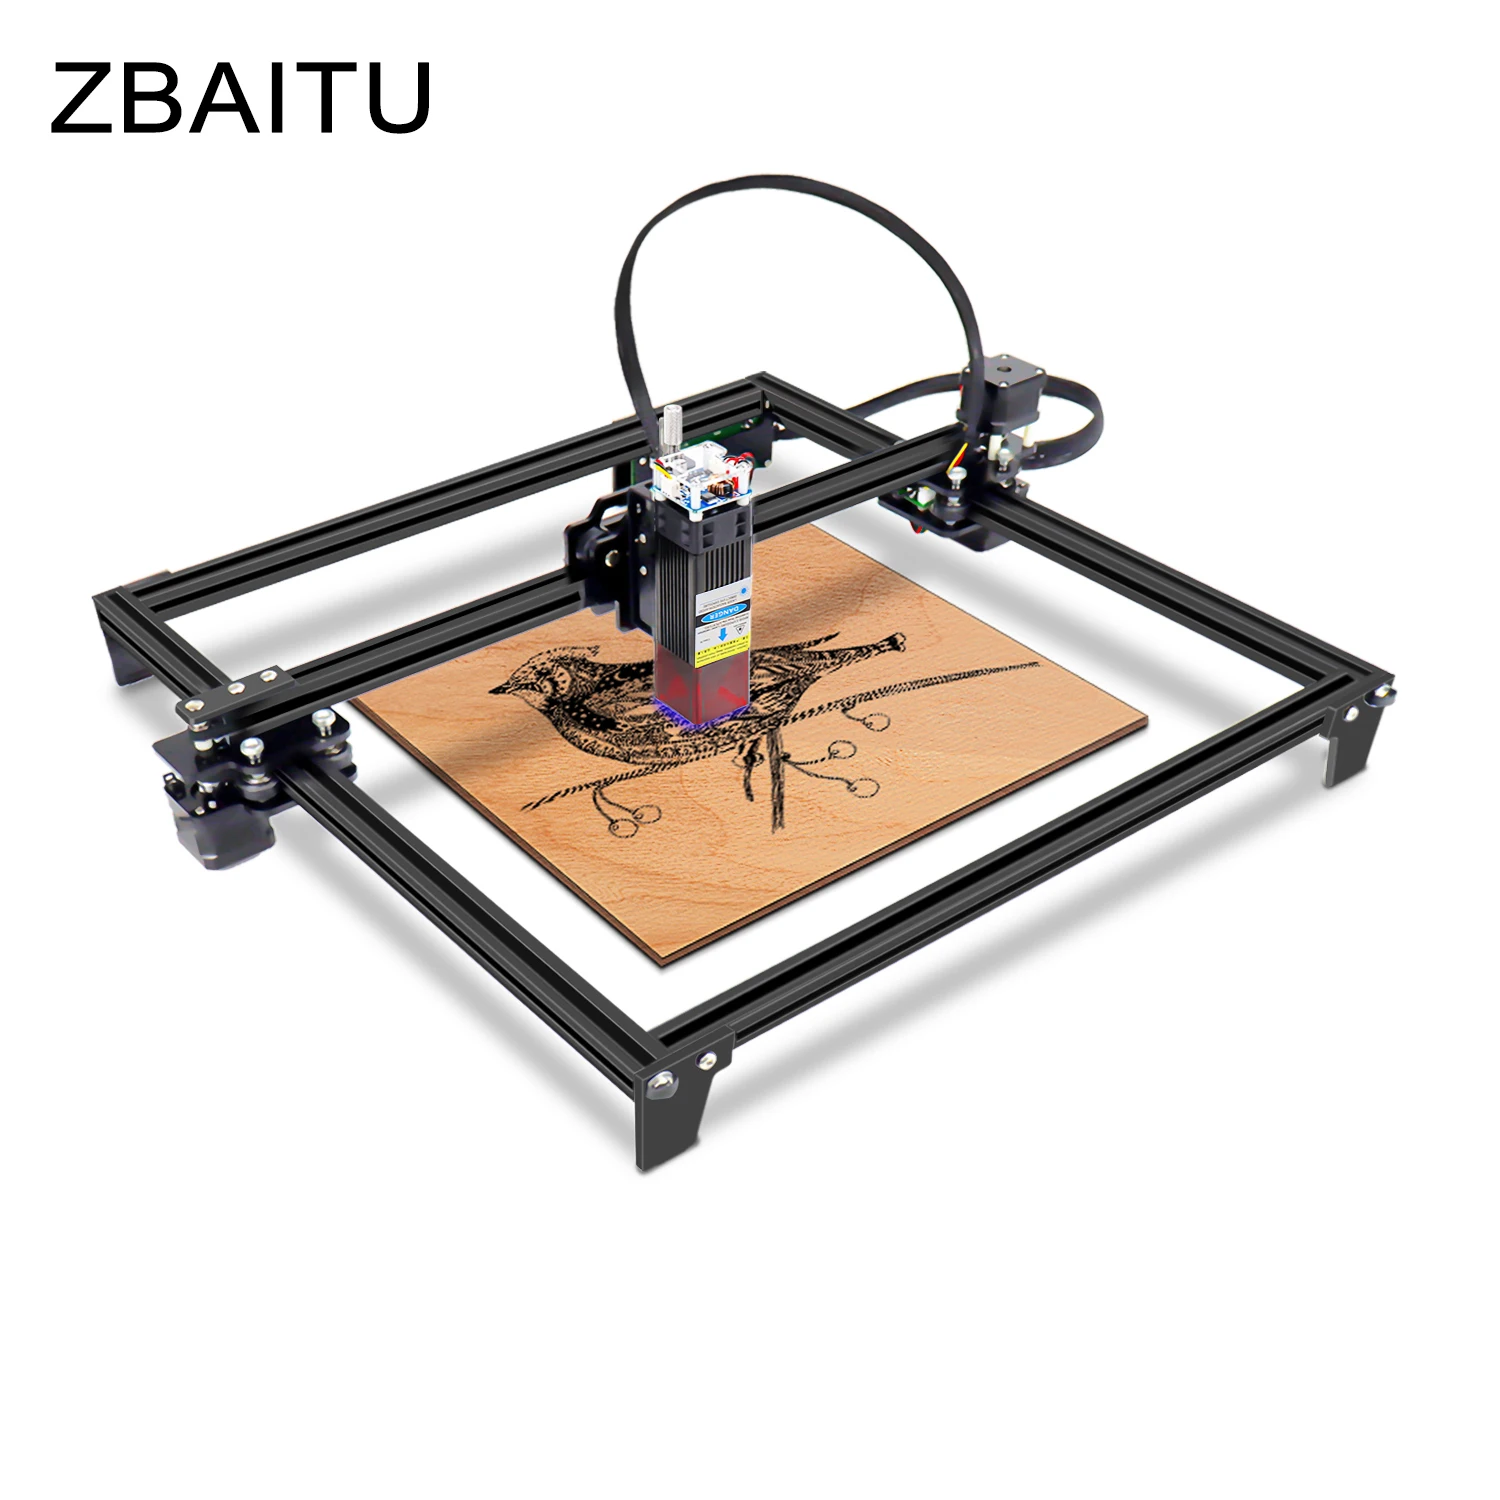 ZBAITU M37 Laser Engraver, 10W Output Power Laser Engraving Cutting Machine  with Air Assist System, 80W High Accuracy Laser Cutter and Engraver Machine  for Metal and Wood, Acrylic, Leather, Glass DIY 